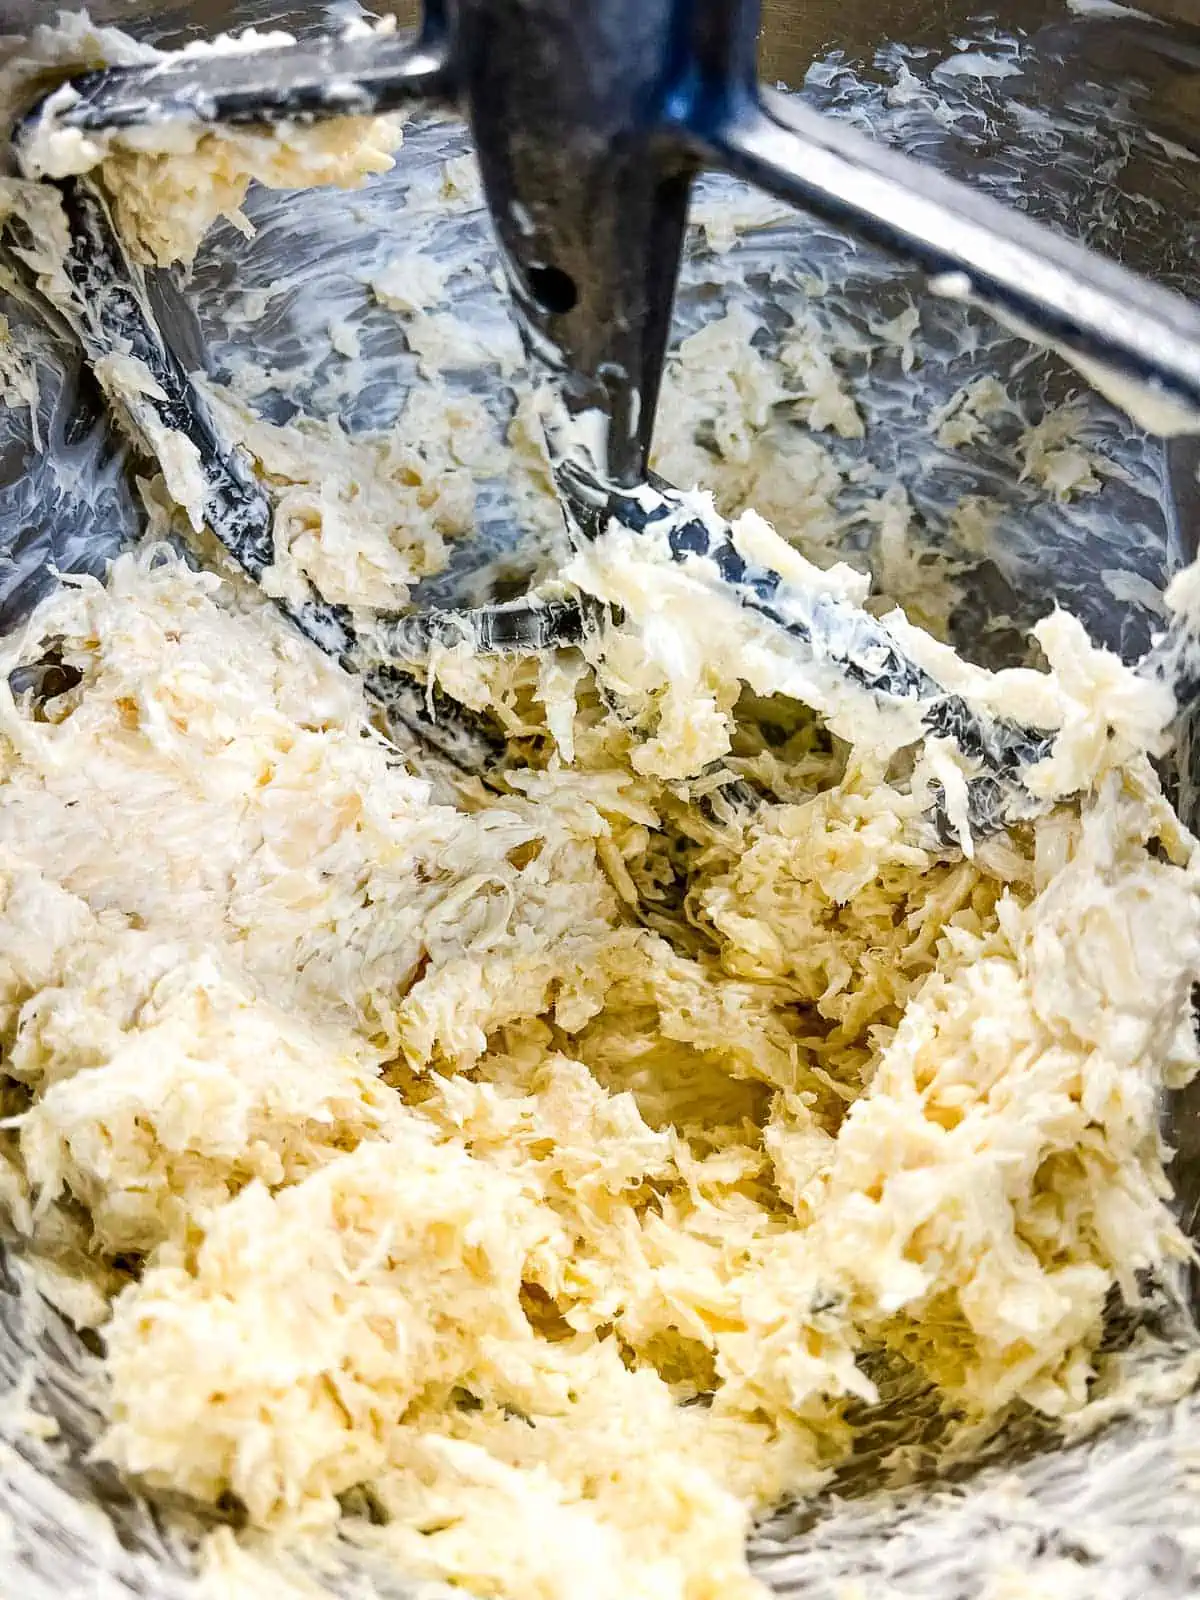 Sauerkraut mixed in with the cheese in a bowl.